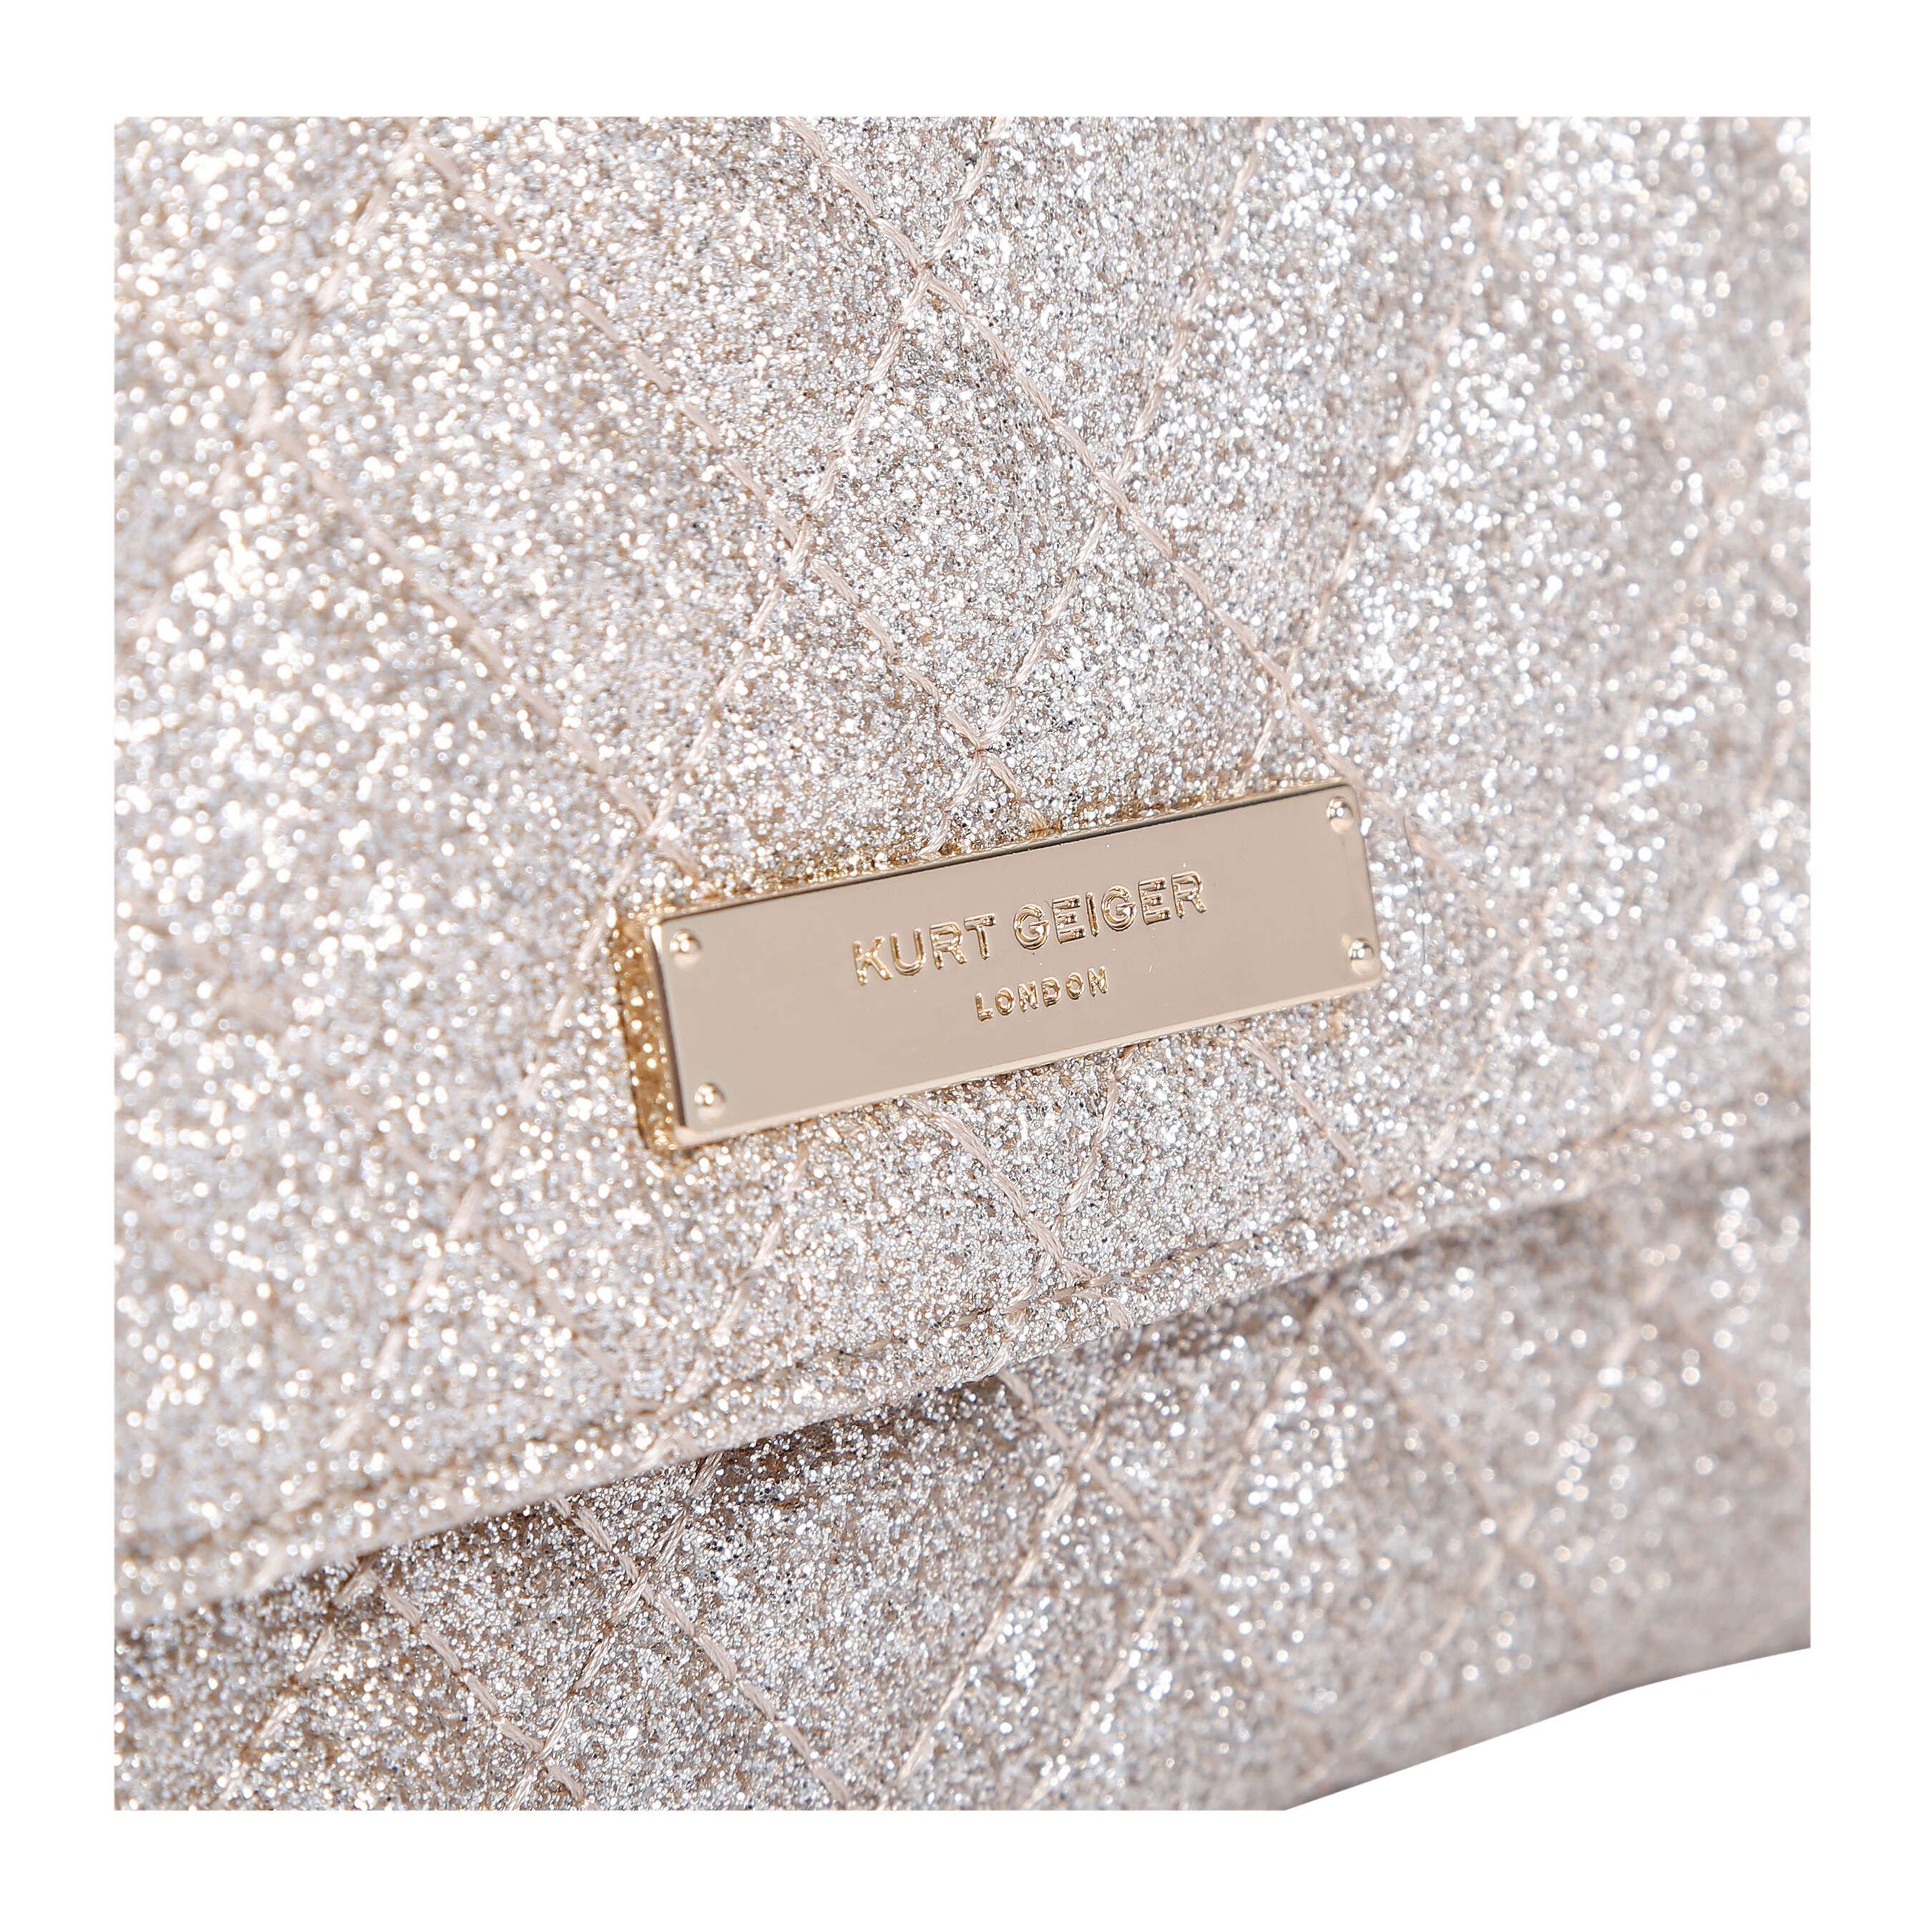 The gold Brixton Chain Wallet is crafted from glitter fabric with overstitch quilting design. There is a gold tone metal branded plate on the front flap.